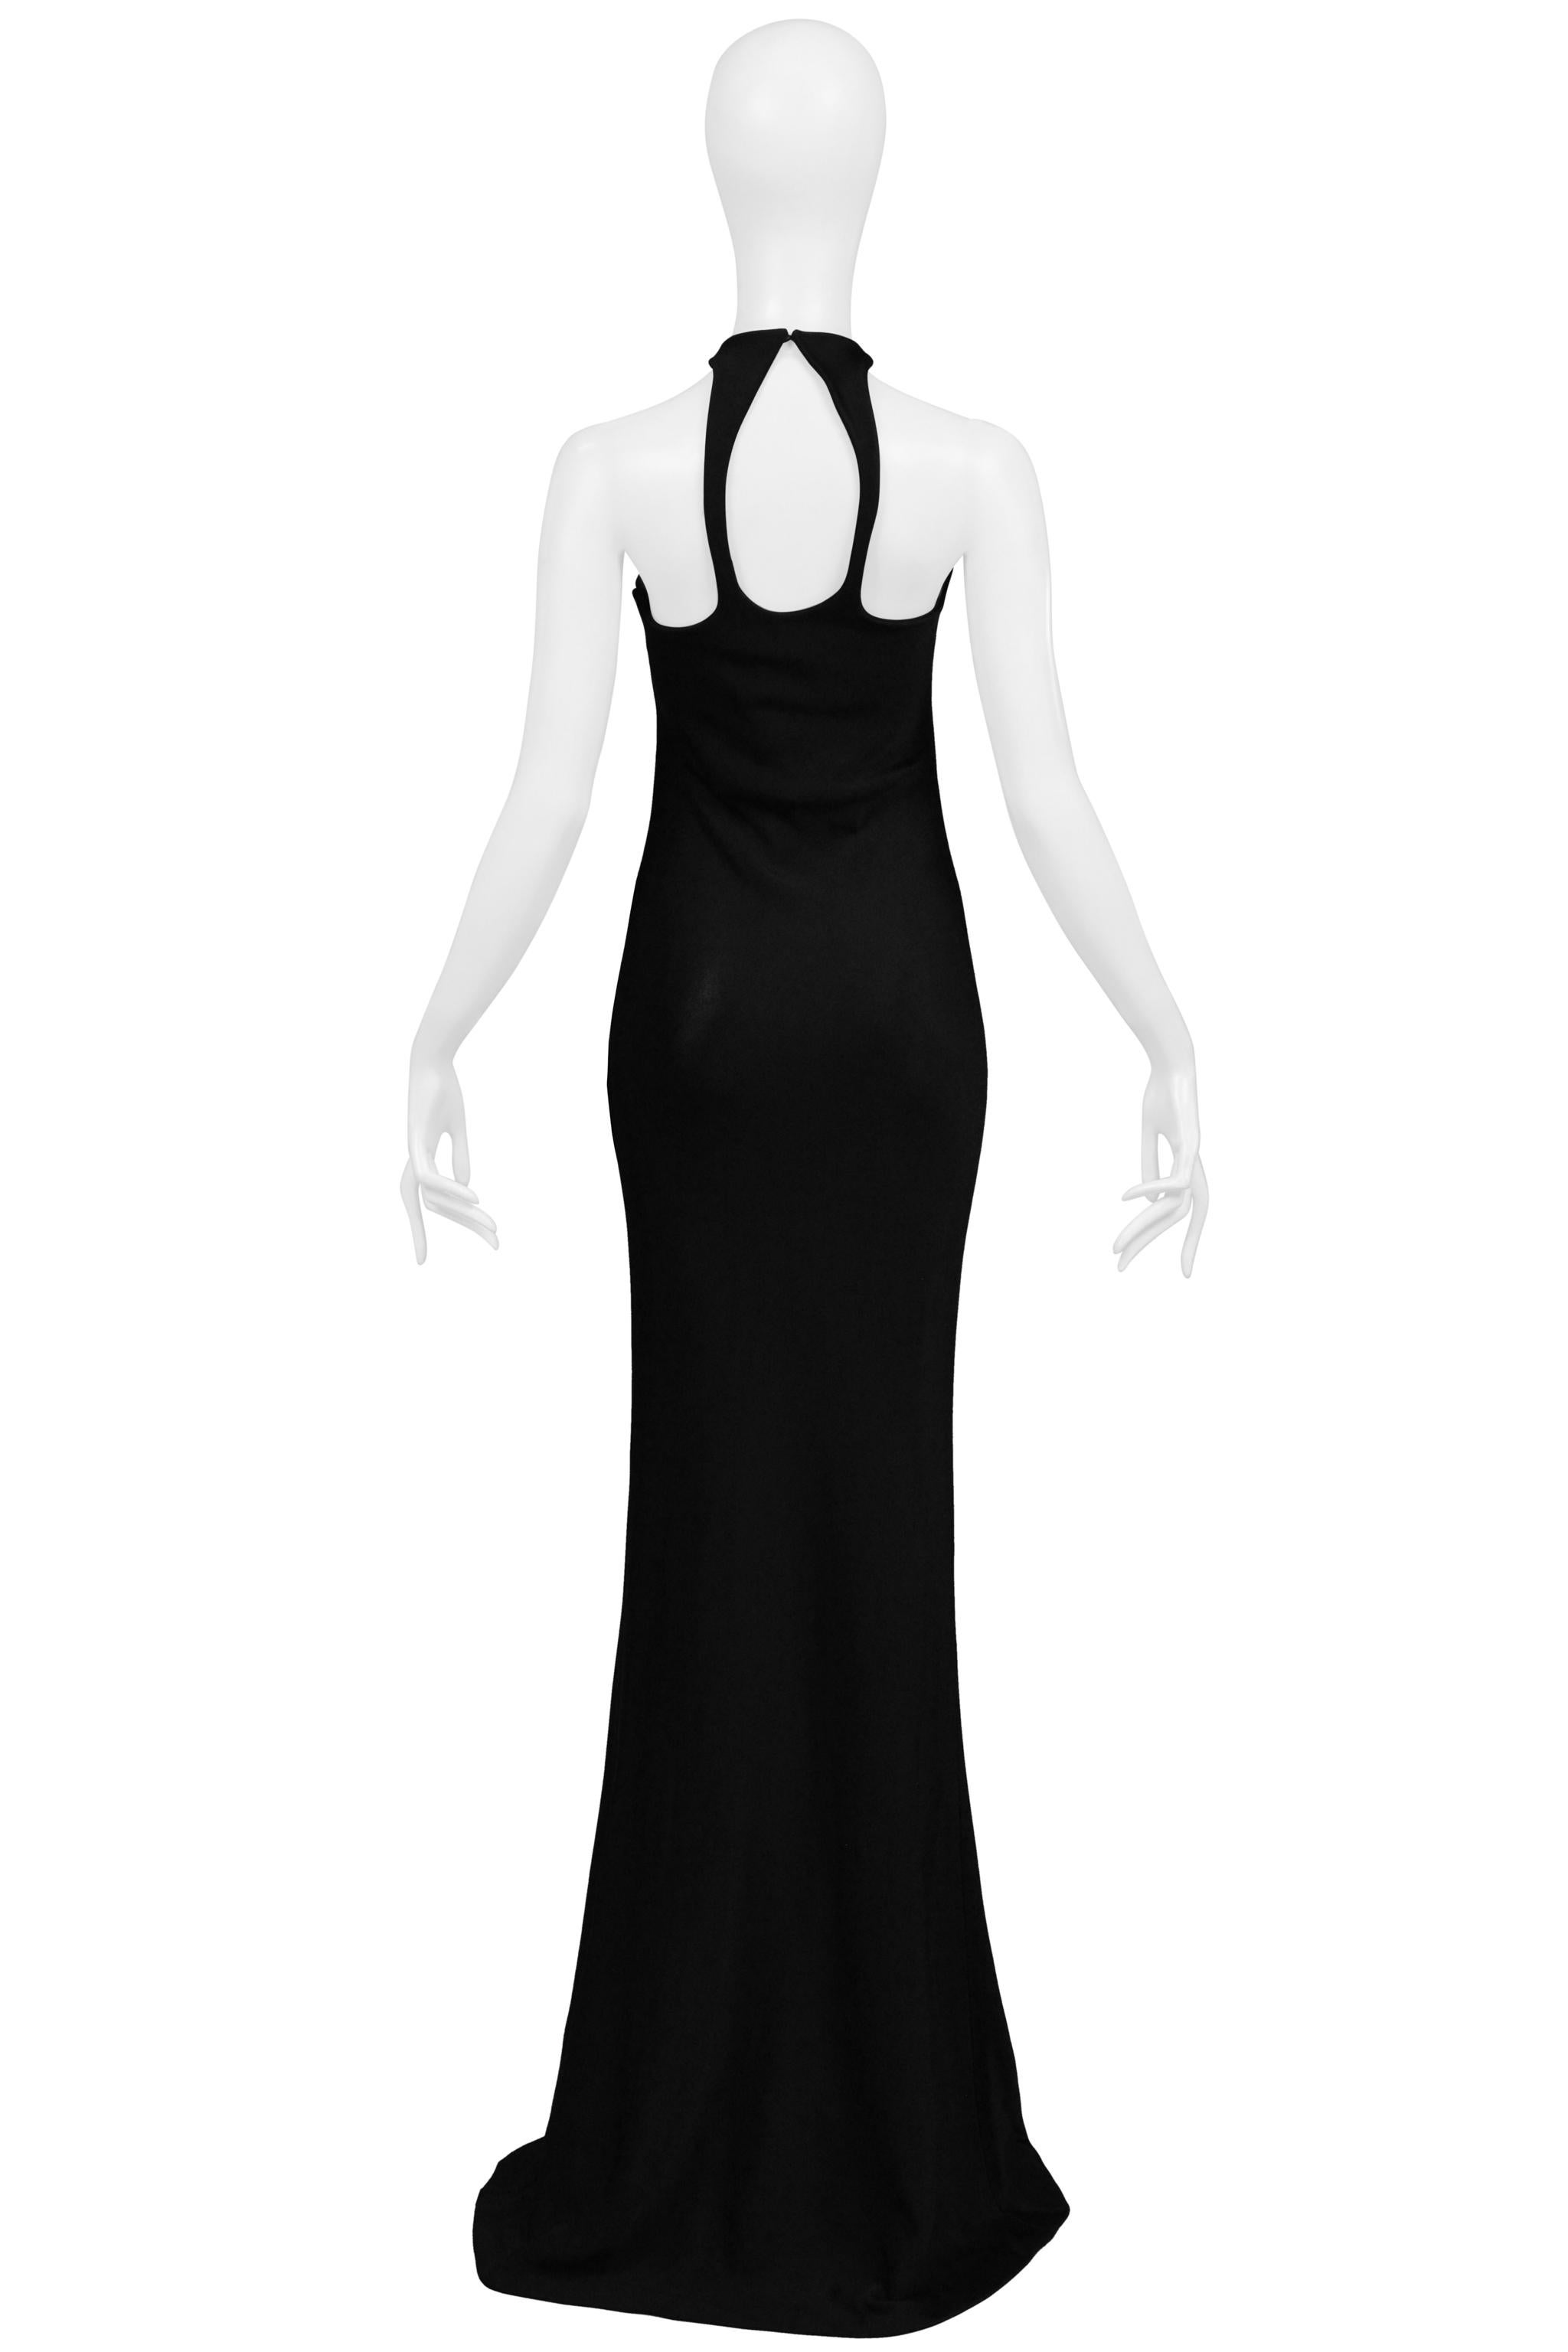 Sophia Kokosalaki Black Architectural Evening Gown With Intricate Bodice 2008 For Sale 5